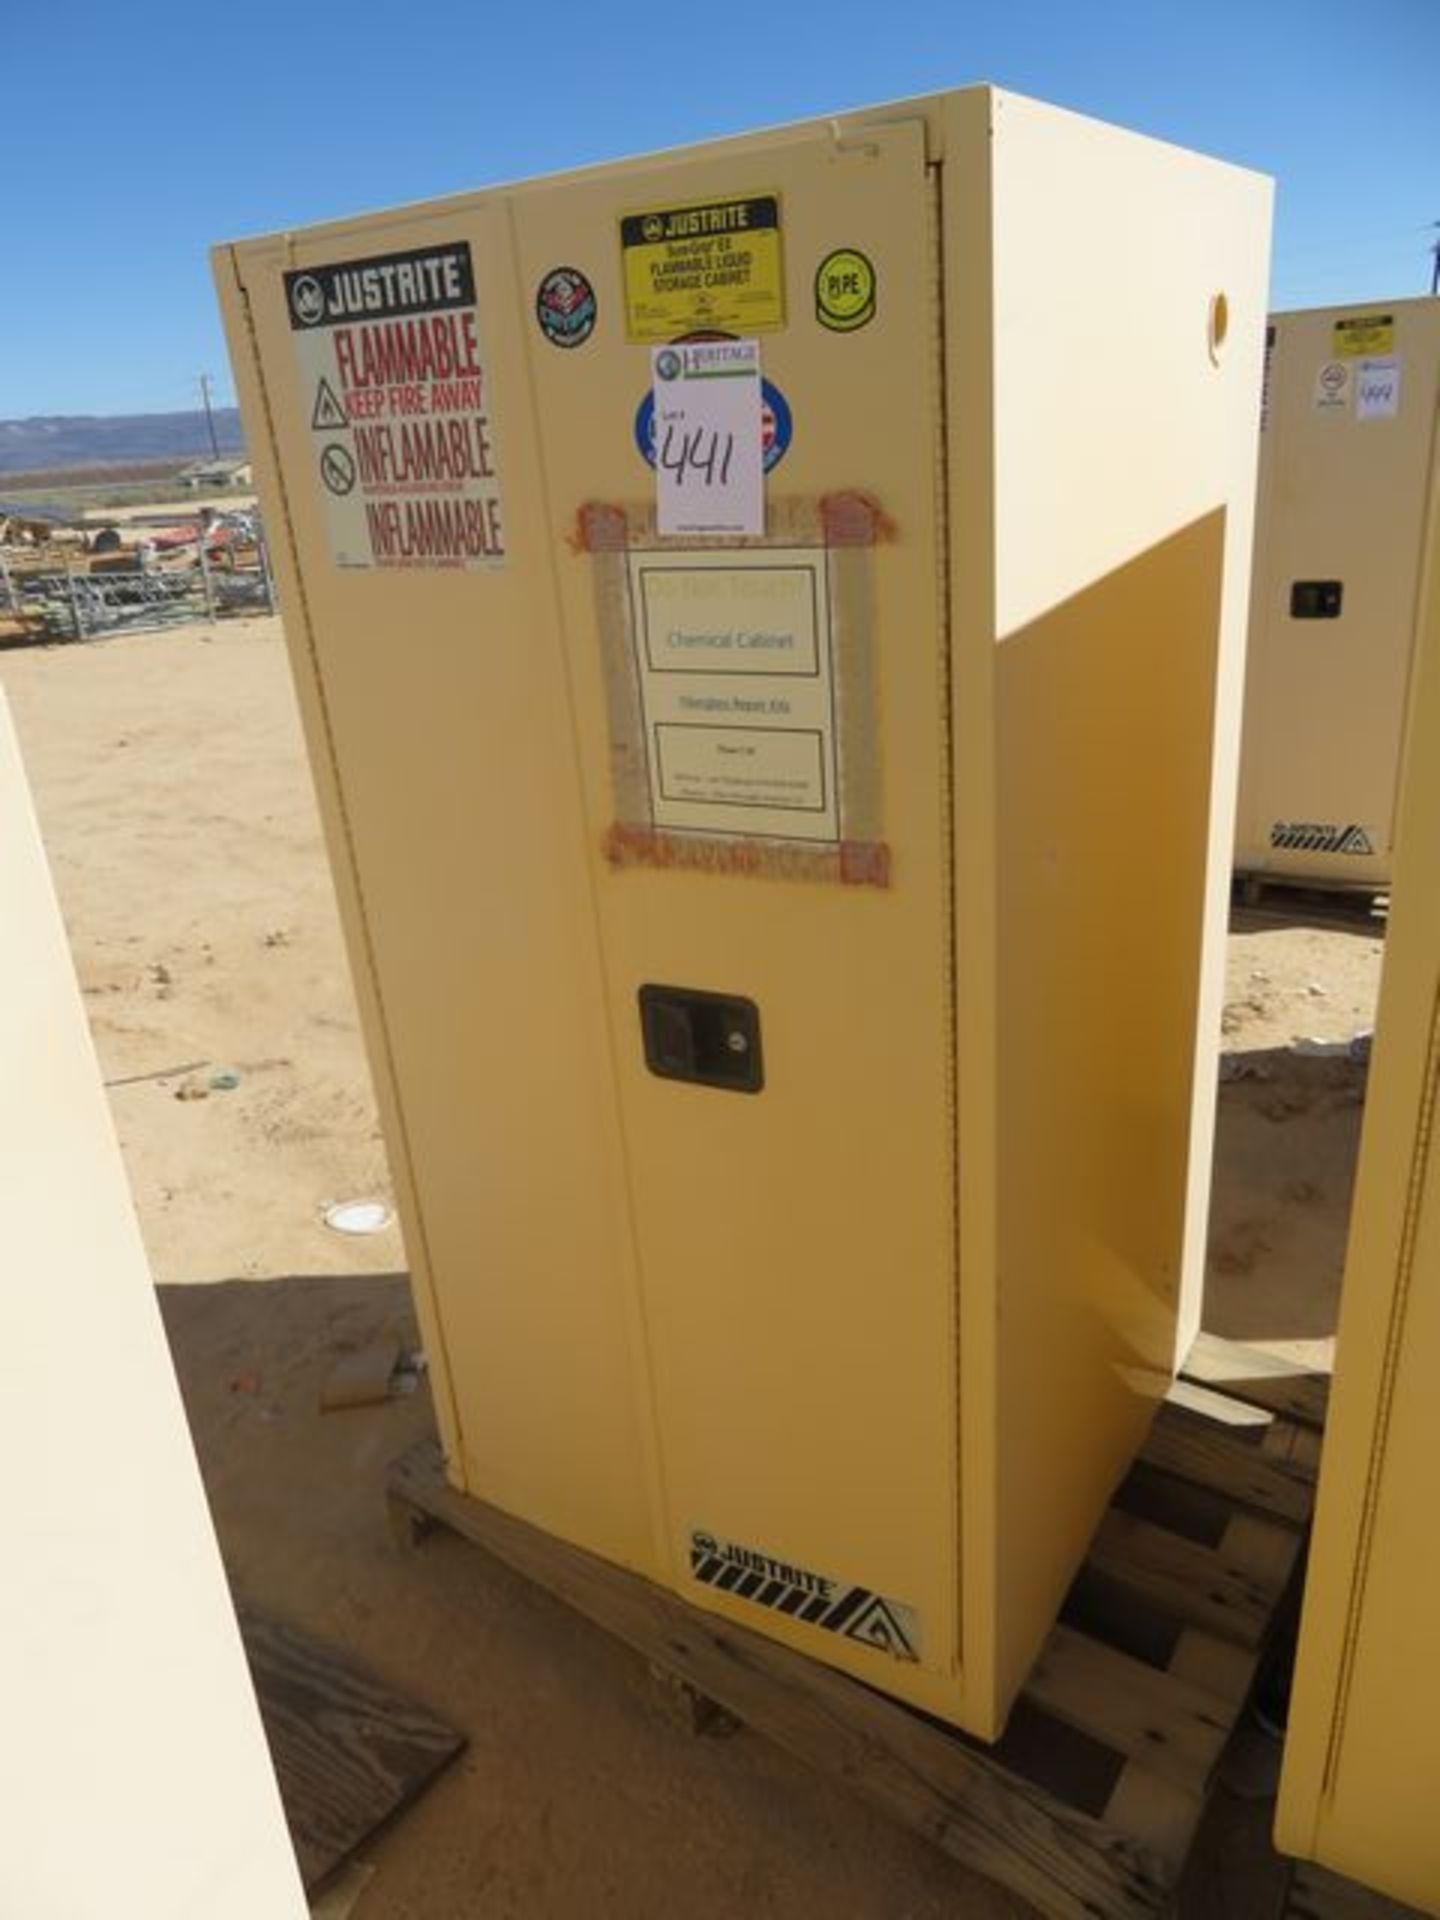 Justrite 896020 Flammable Liquid Storage Cabinet. 60 Gallon Capacity. Asset Located at 42134